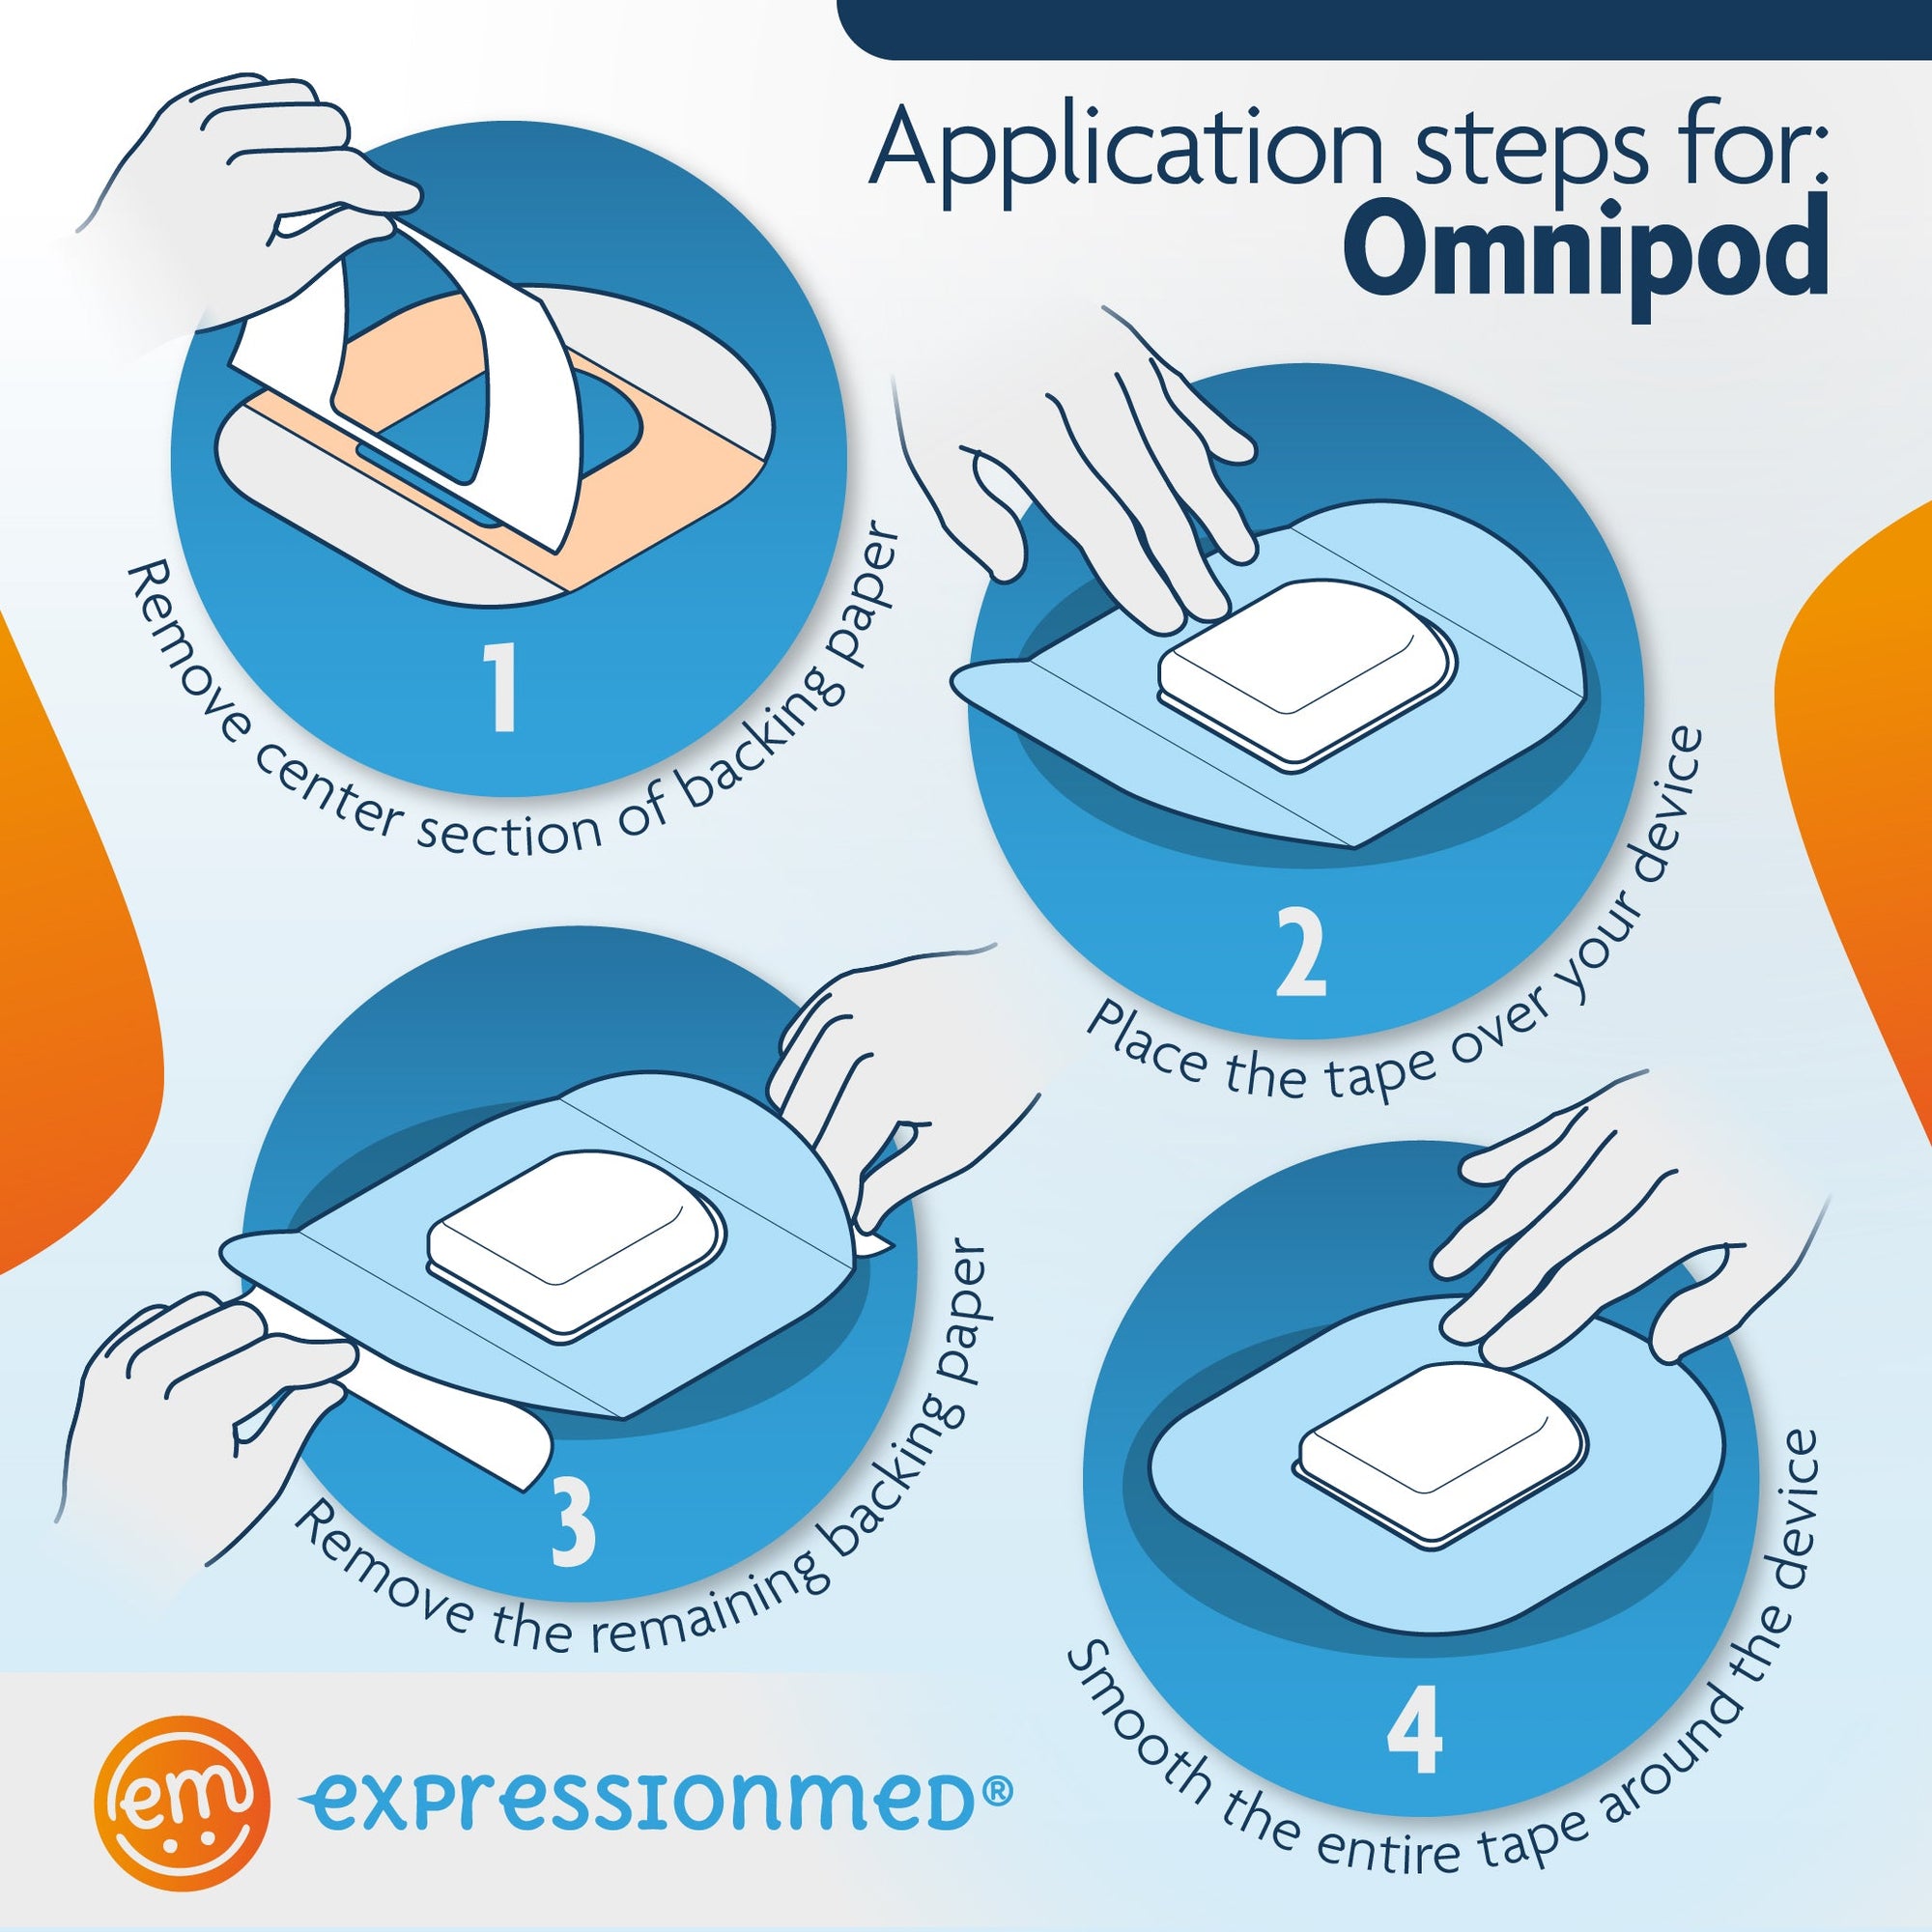 Application Instructions . 1. Prep skin with soap and water. 2. Remove Middle Section and lay center hole over device. 3. Peel off both end sections and smooth down on skin. To remove, hold an edge and strech material off skin.